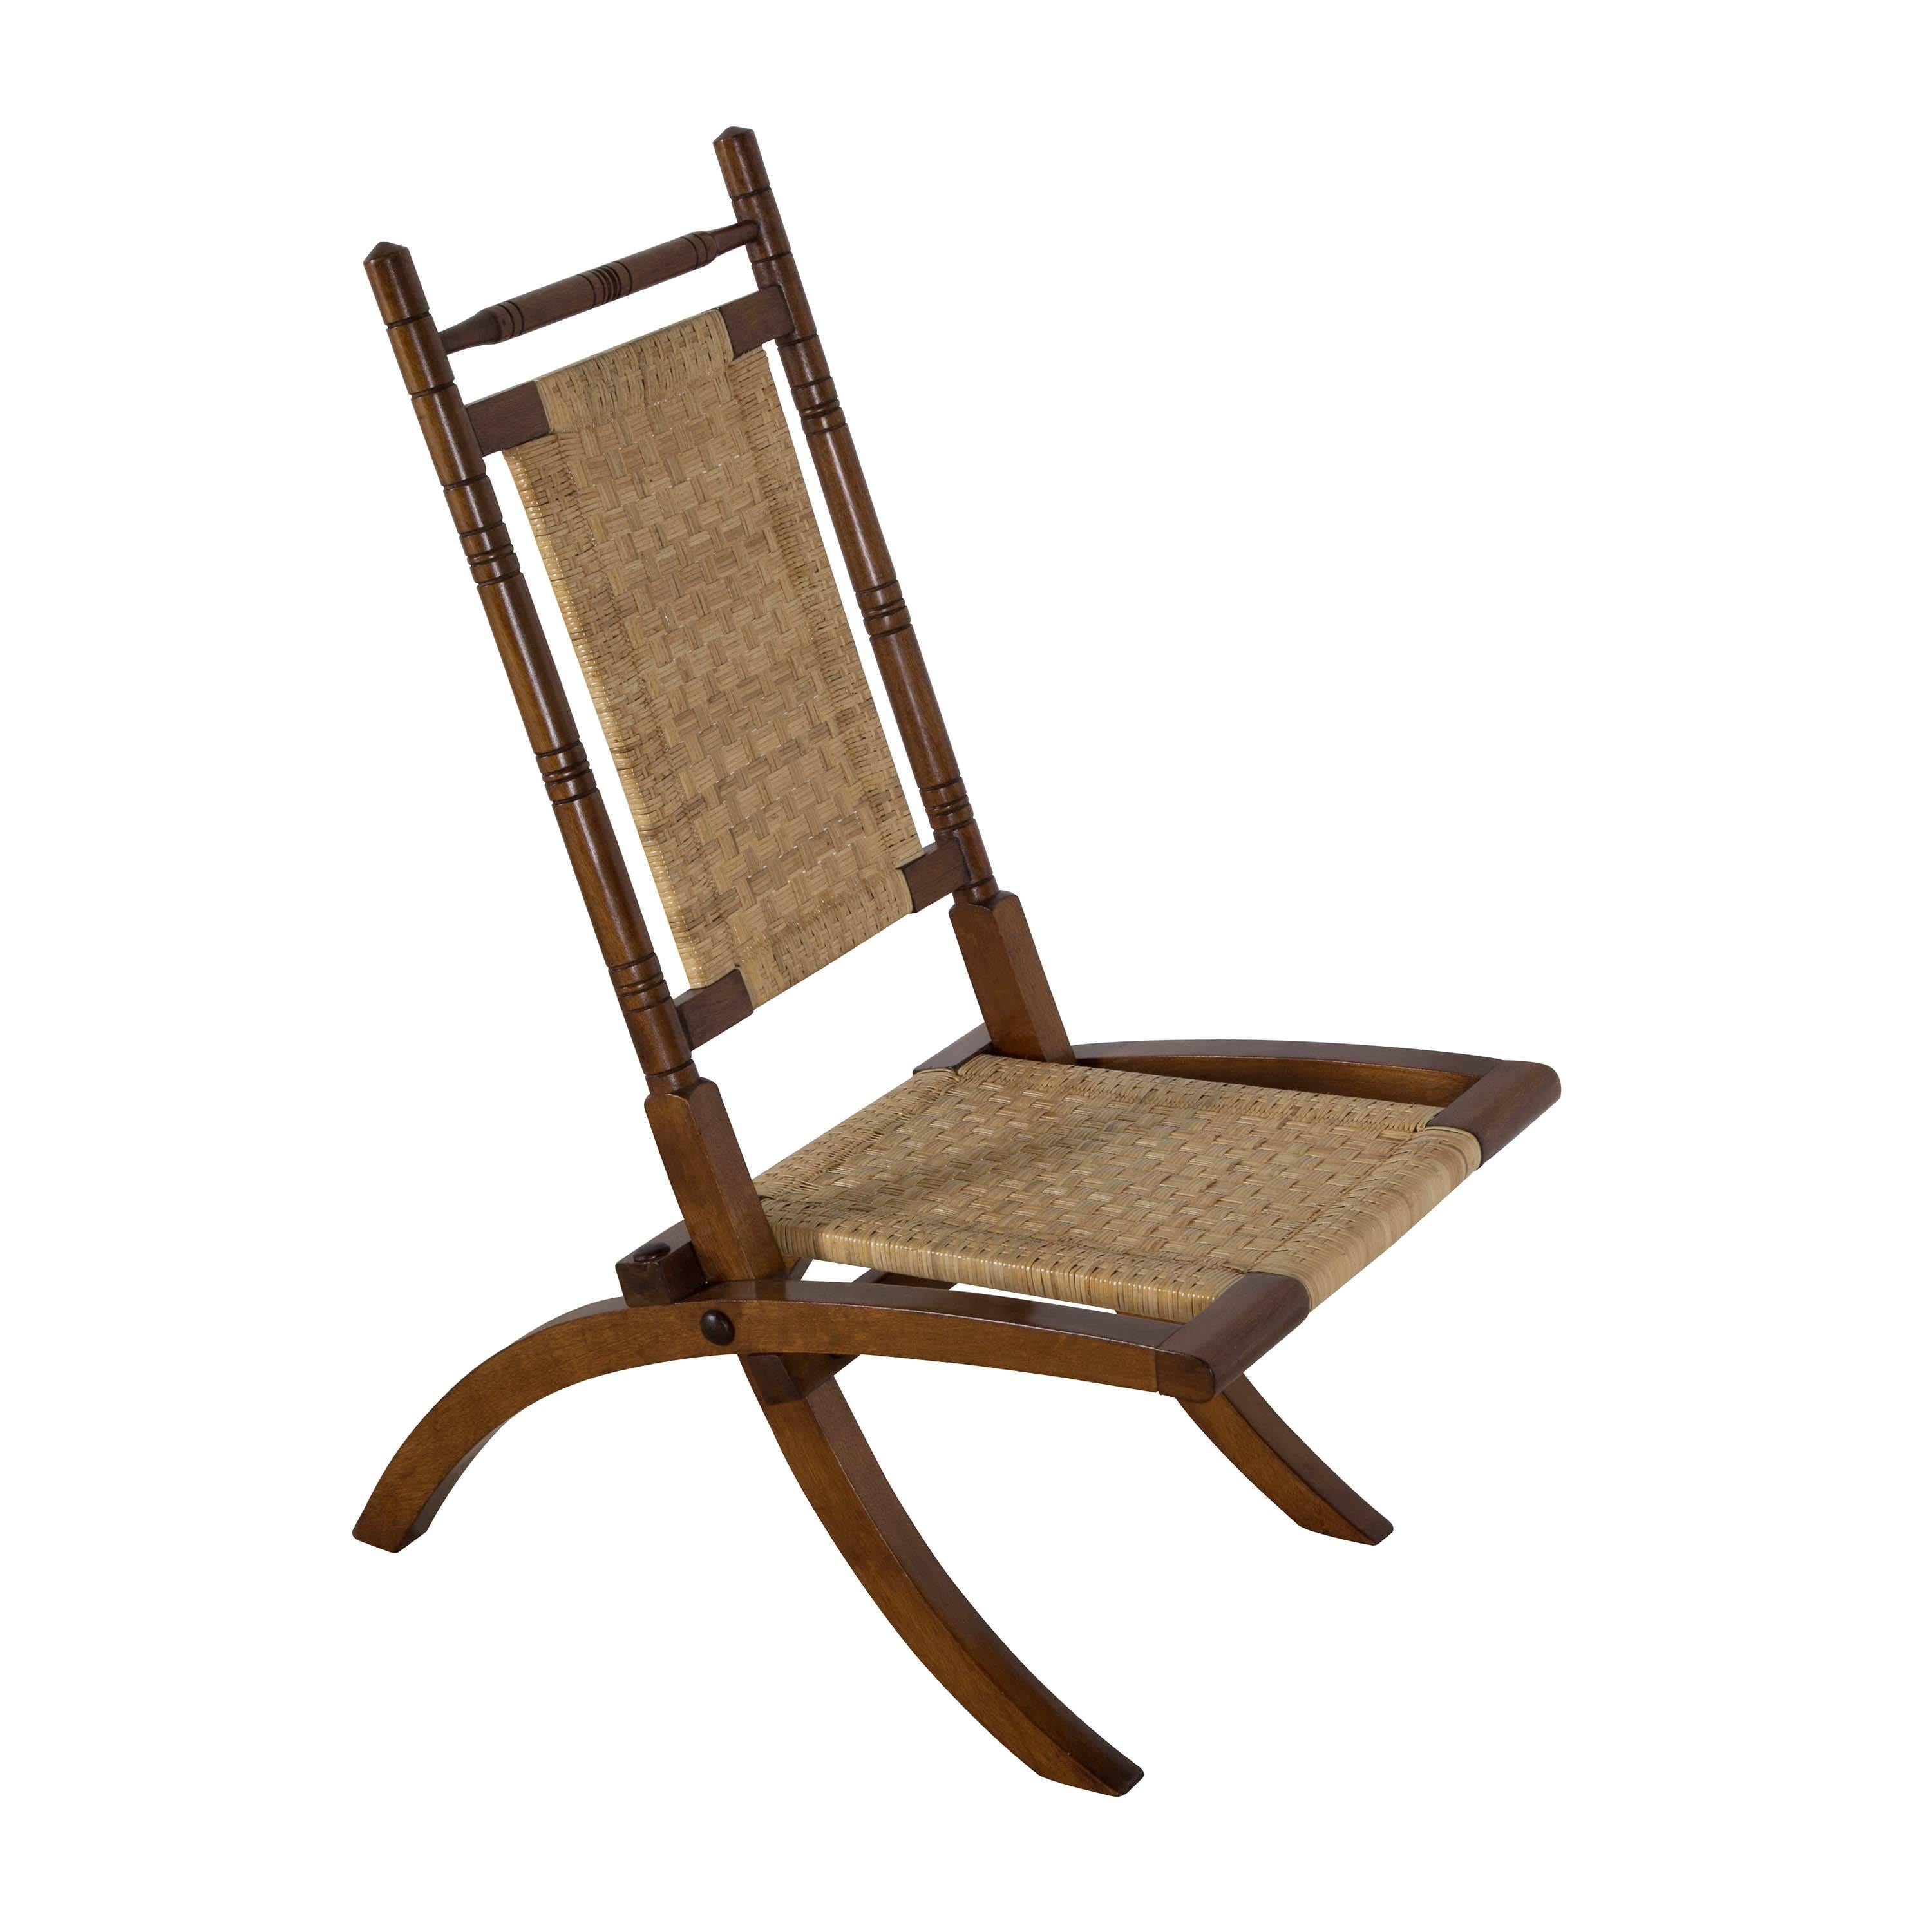 E. W. Godwin folding walnut chair with woven cane back and seat, circa 1880. Good condition. Measures: Seat height 32cm., seat depth 32cm.